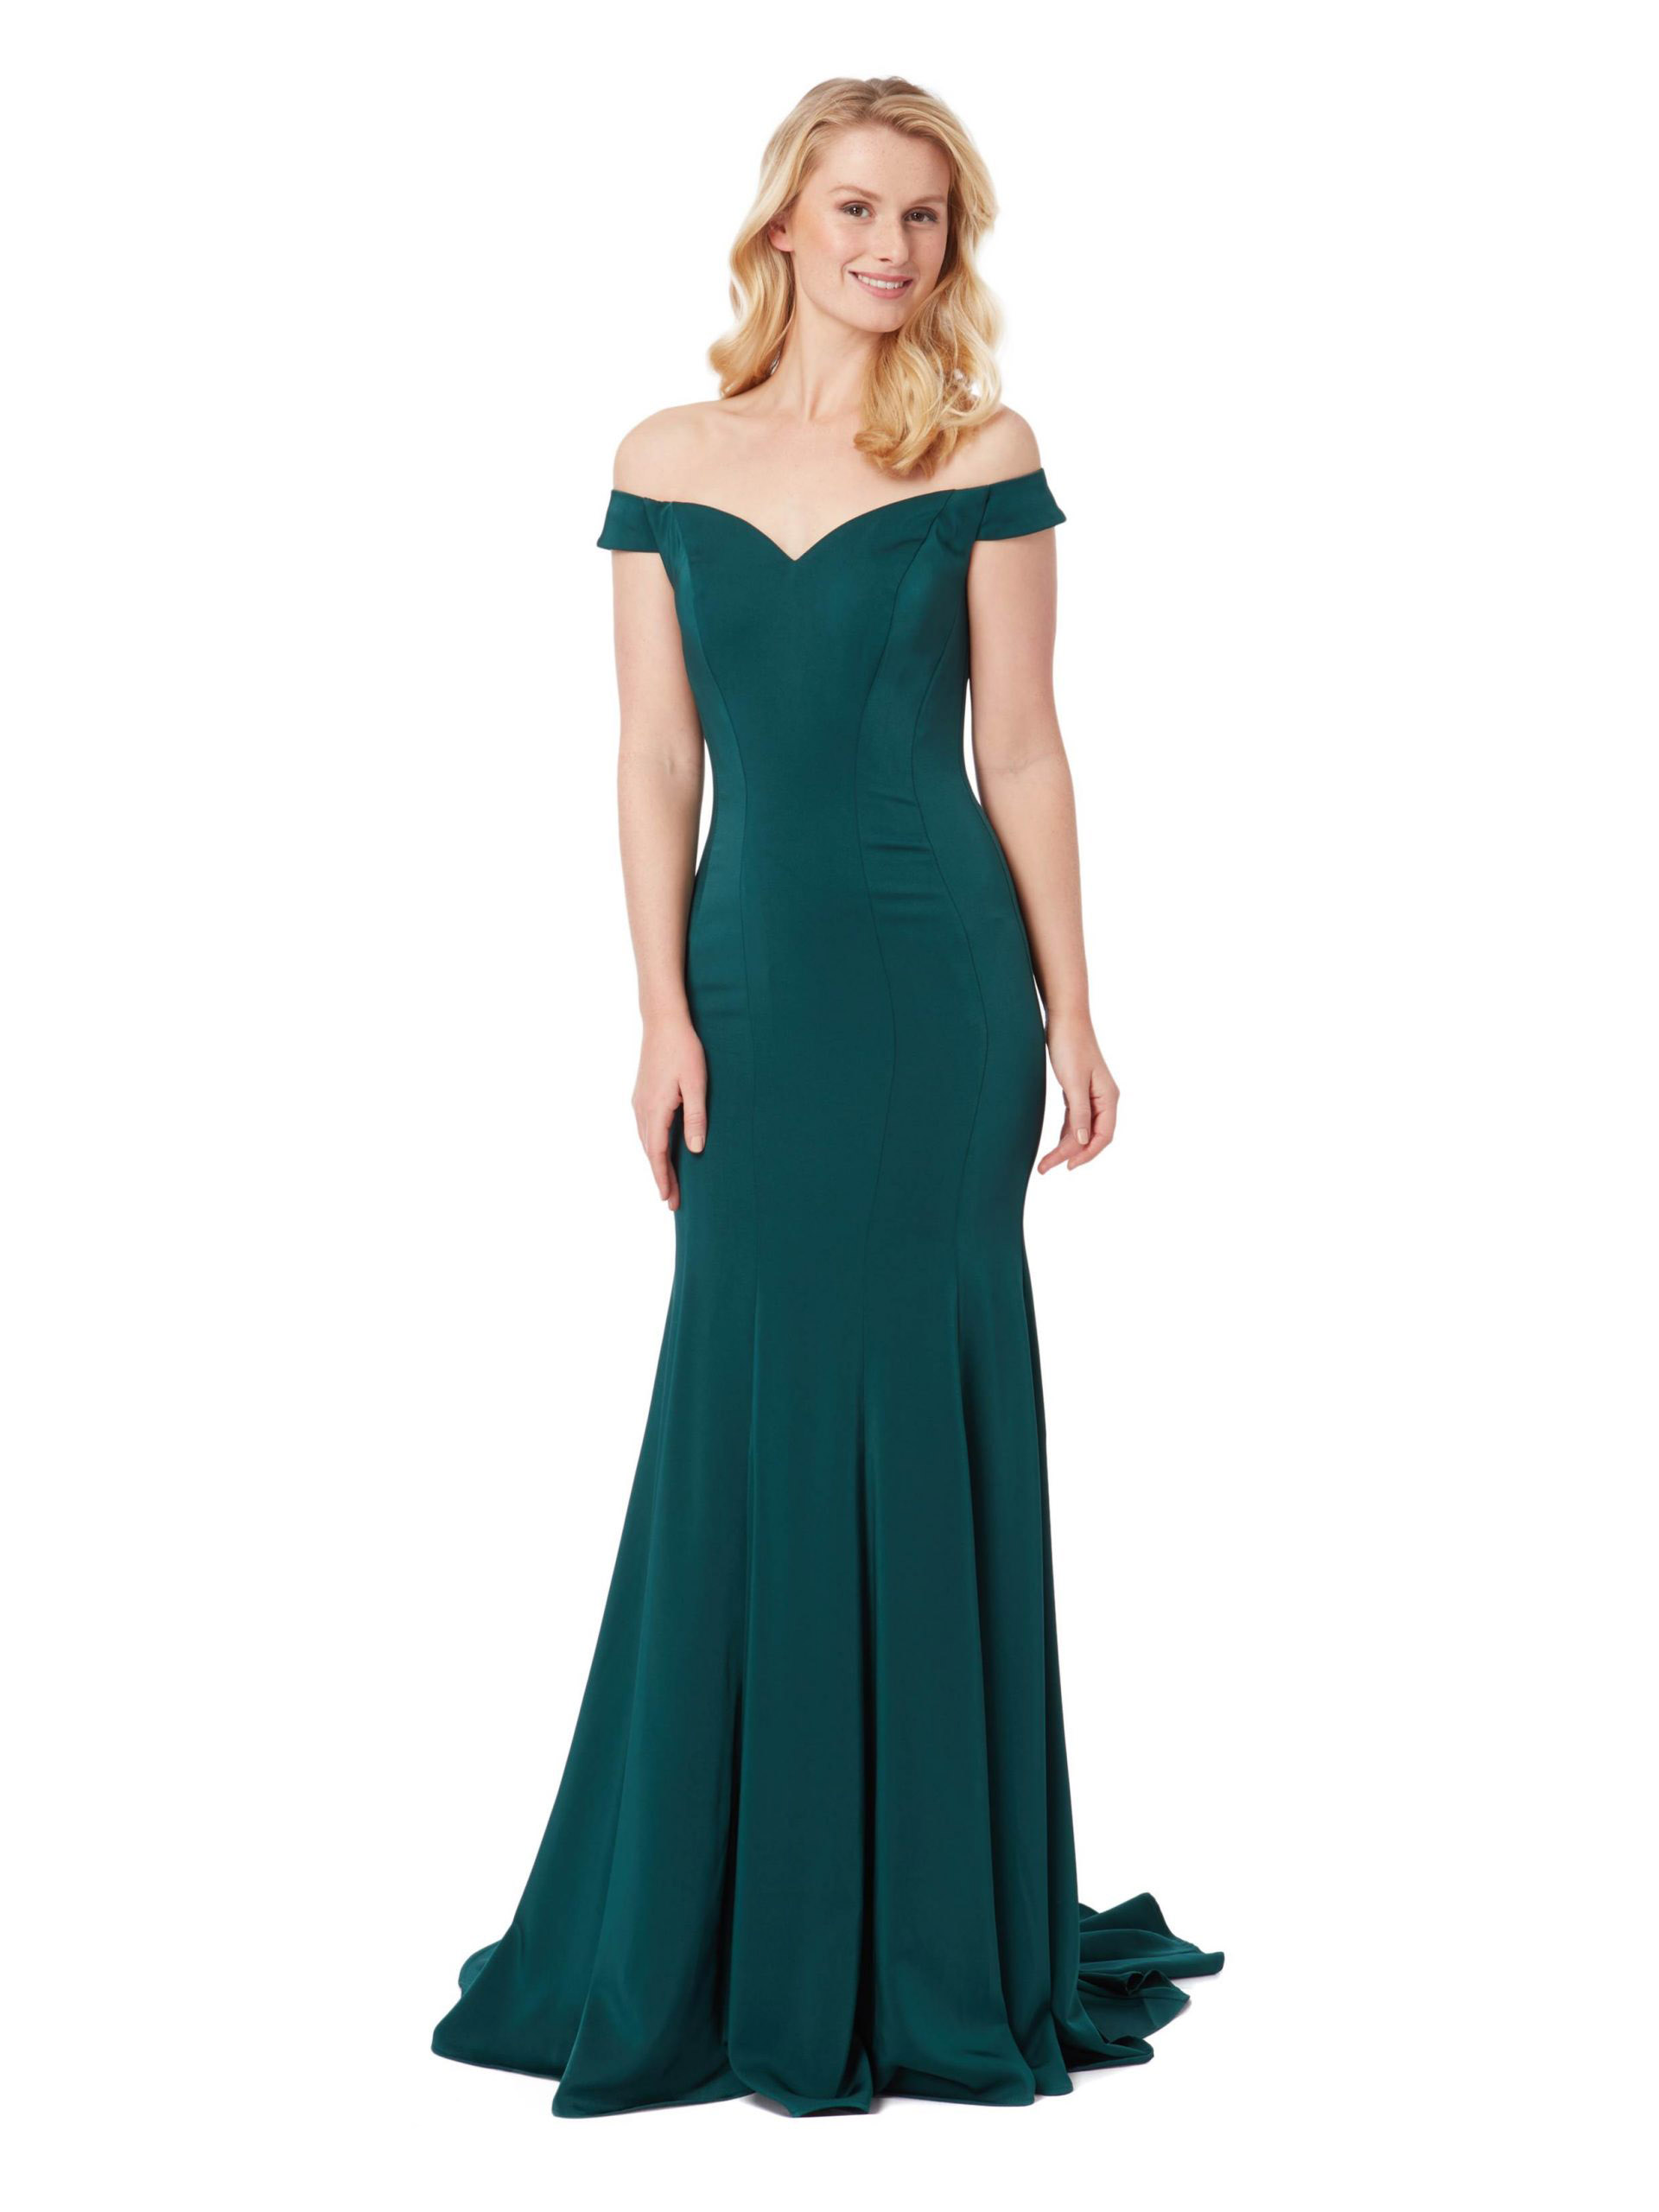 Stately emerald gown for formal and fun events, the Mariela dress, available at MK Prom now!